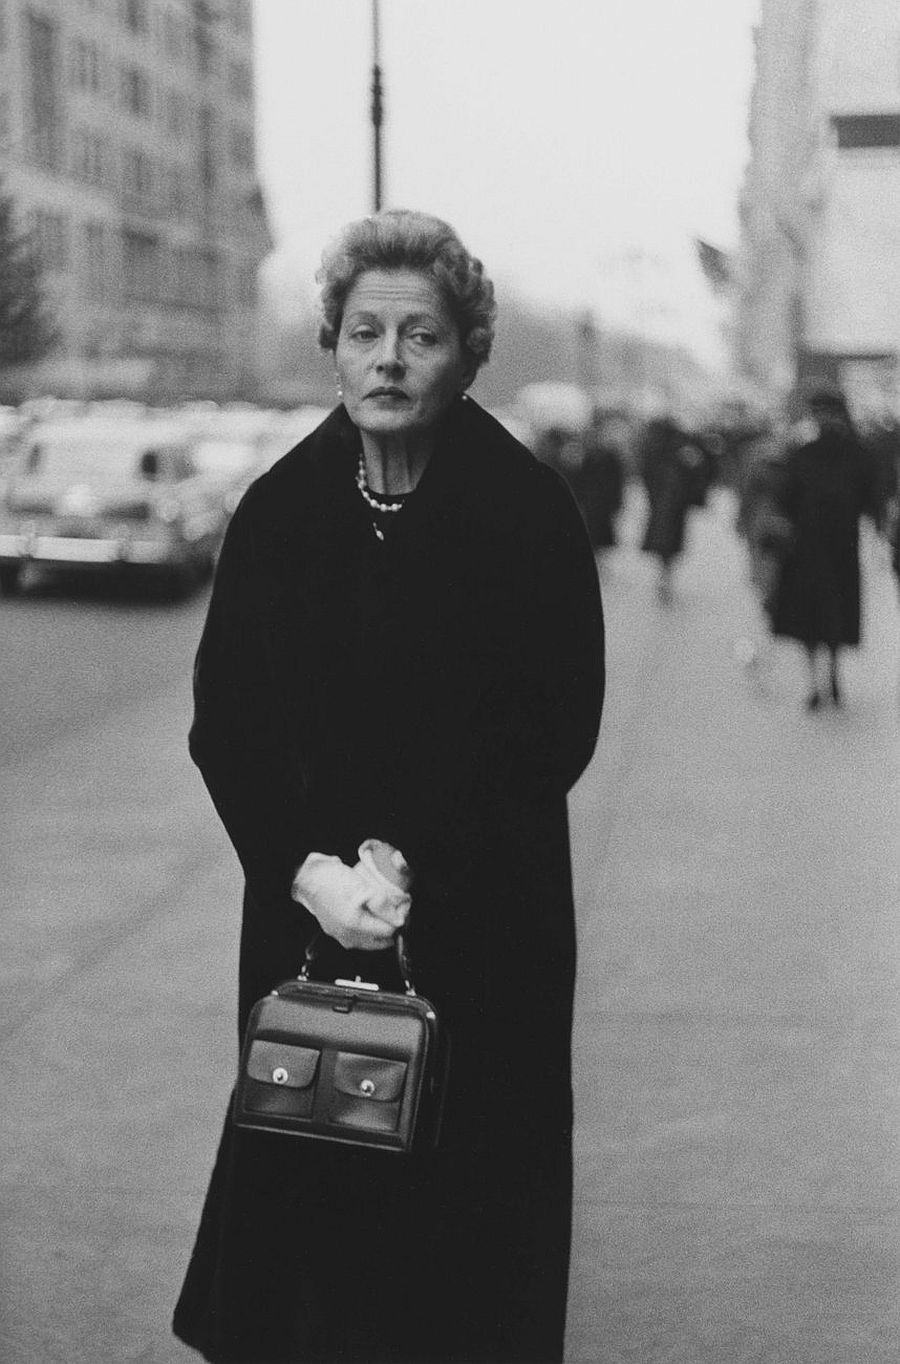 Diane Arbus, Woman with white gloves and a pocketbook, N.Y.C., 1956.